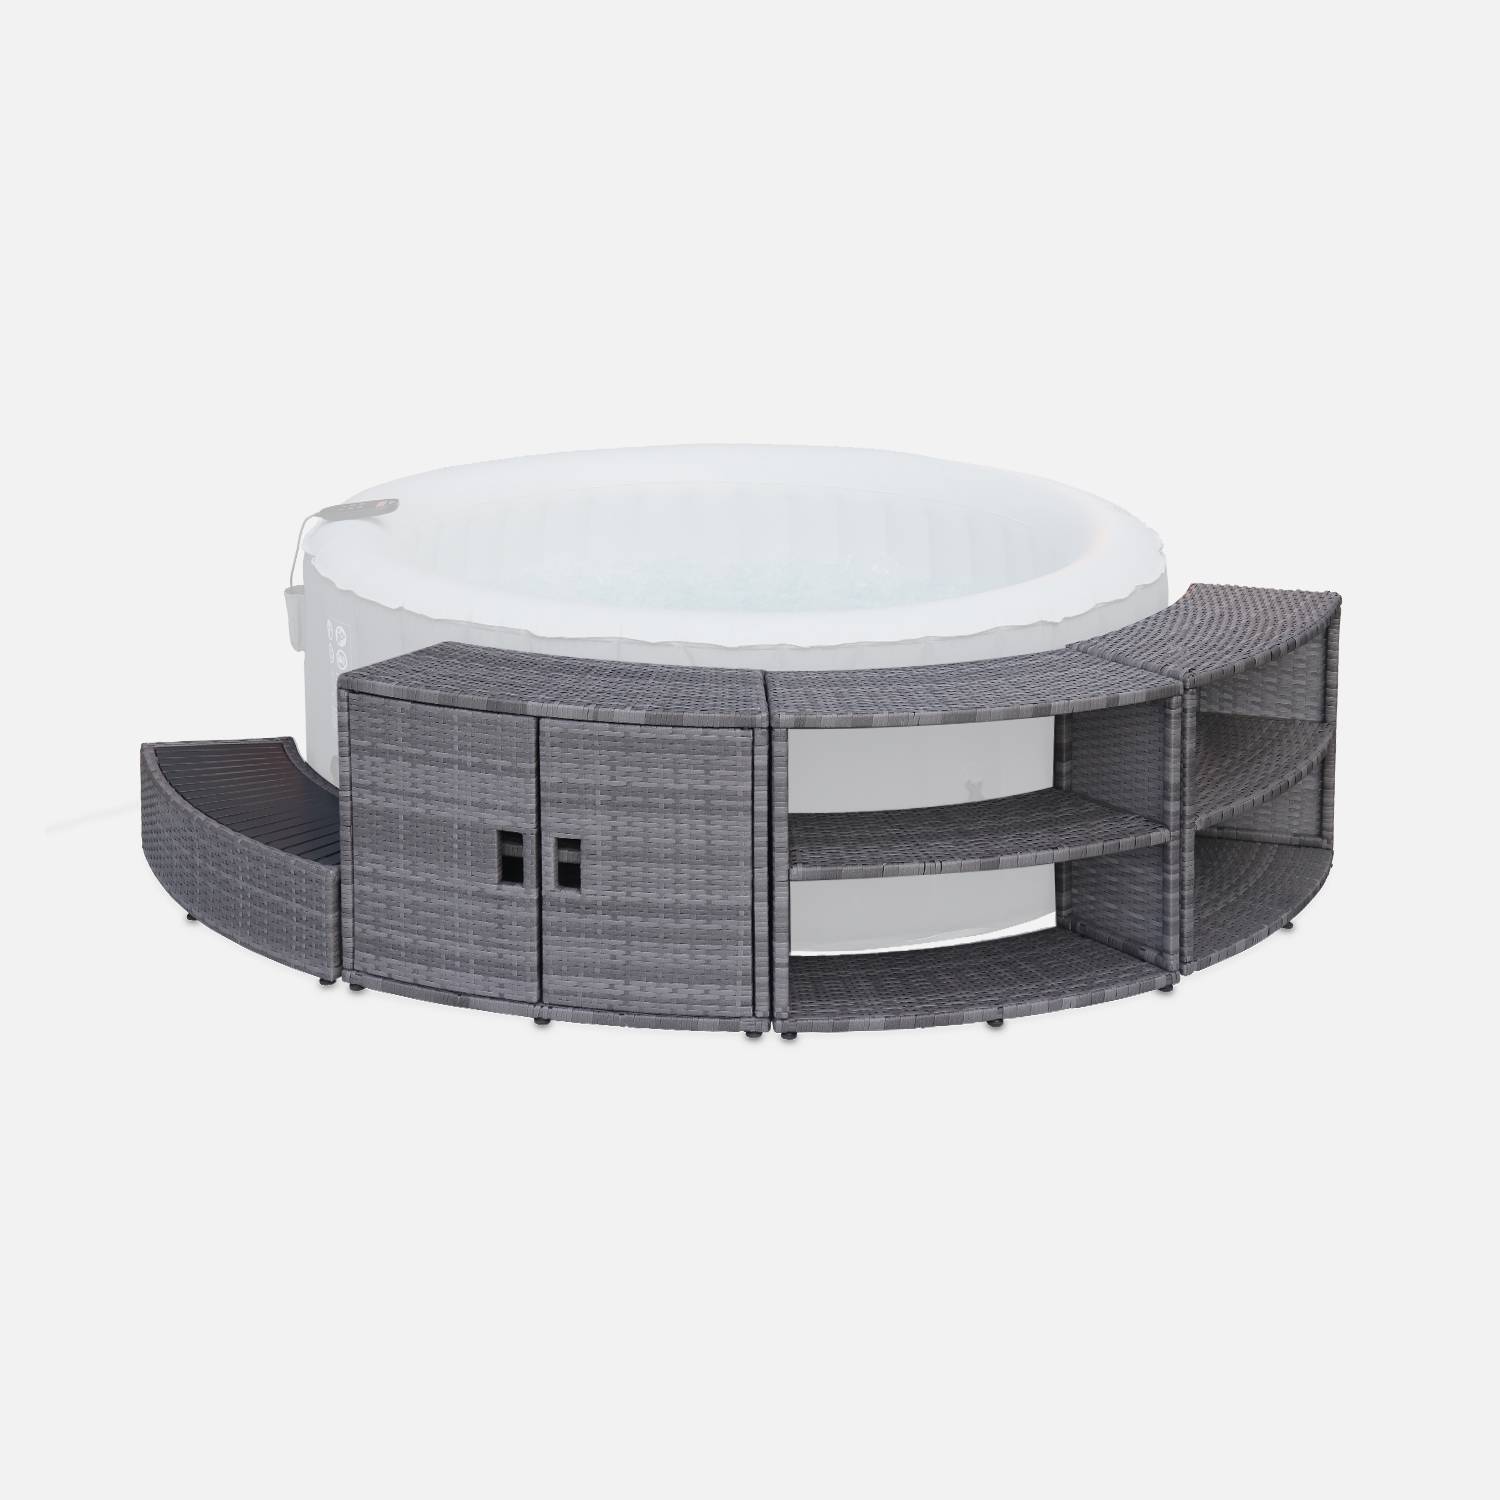 Grey polyrattan for hot tub surrond for 4 or 6 seater hot tub 180 x 70 cm - aluminium structure, shelves, cabinet and footstep Photo1